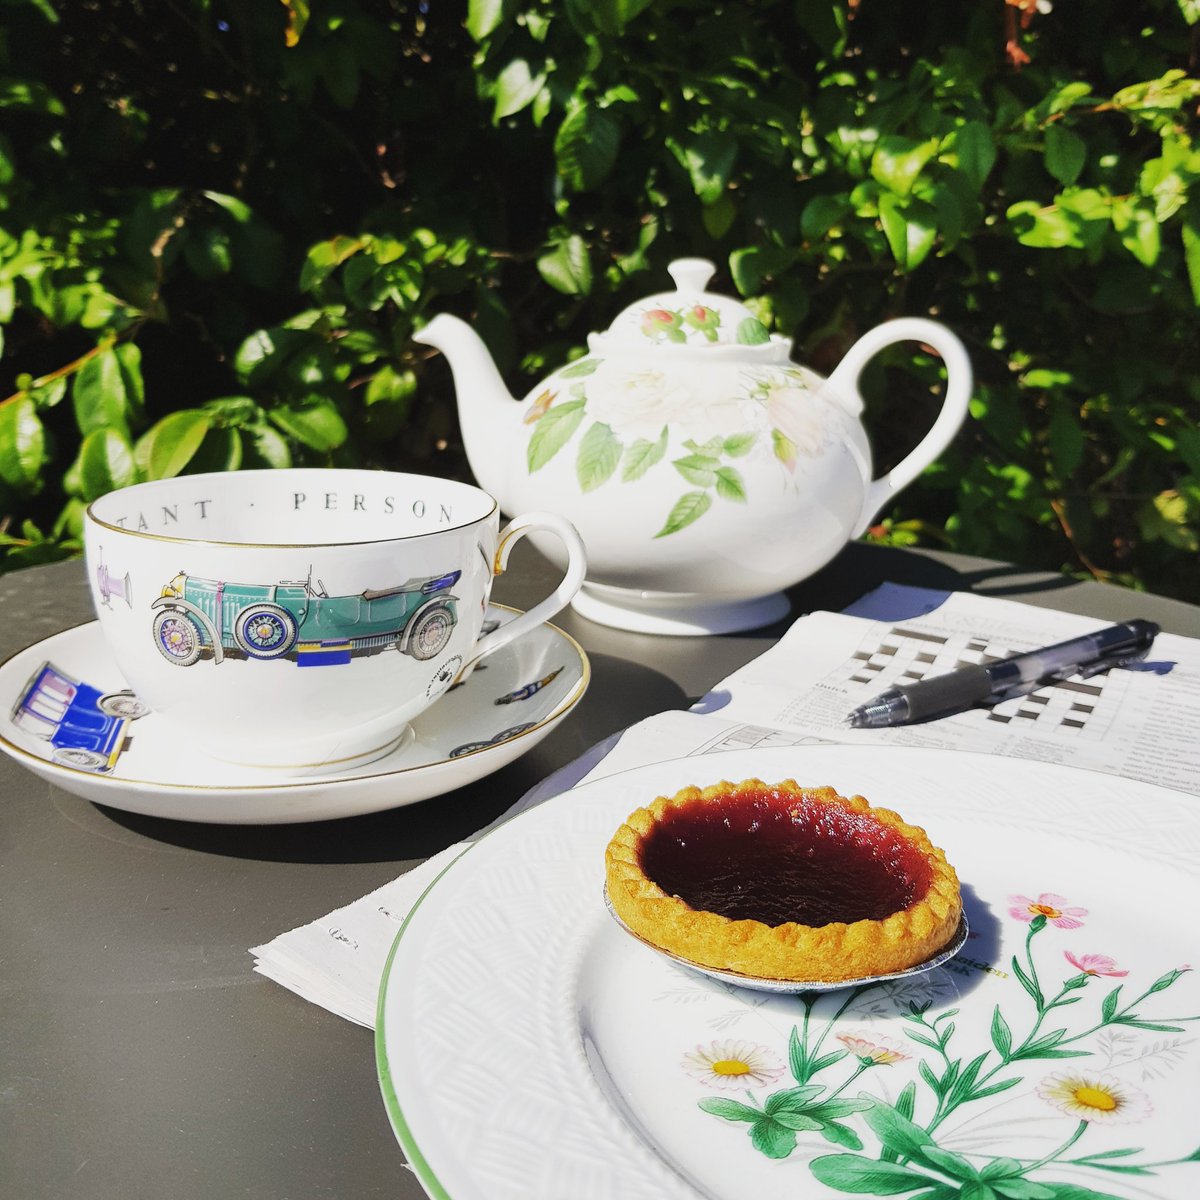 What a lovely morning to enjoy a brew in the garden with a crossword and a jam tart.

Check out all these wonderful Royal Worcester pieces and more on our website

replacingpieces.com/pages/royal-wo…

#royalworcester #vip #somersetflowers #rhs  #teapot #summersunday #teatime☕️ #jamtart